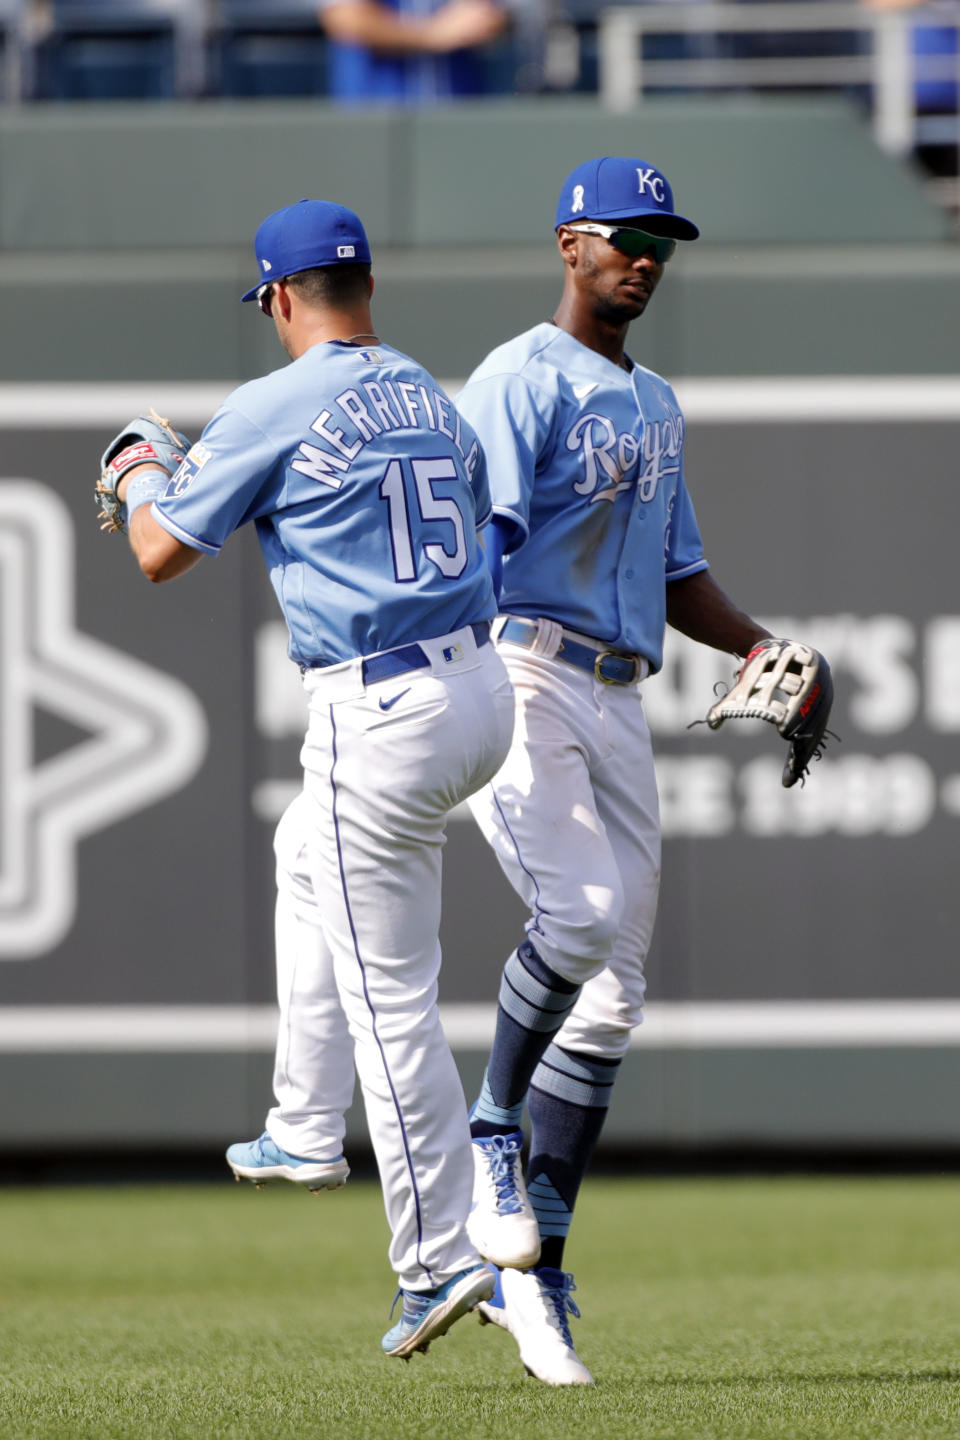 Kansas City Royals outfielders Whit Merrifield, left, and Michael A. Taylor, right, celebrate their win over the Boston Red Sox at the conclusion of a baseball game at Kauffman Stadium in Kansas City, Mo., Sunday, June 20, 2021. (AP Photo/Colin E. Braley)